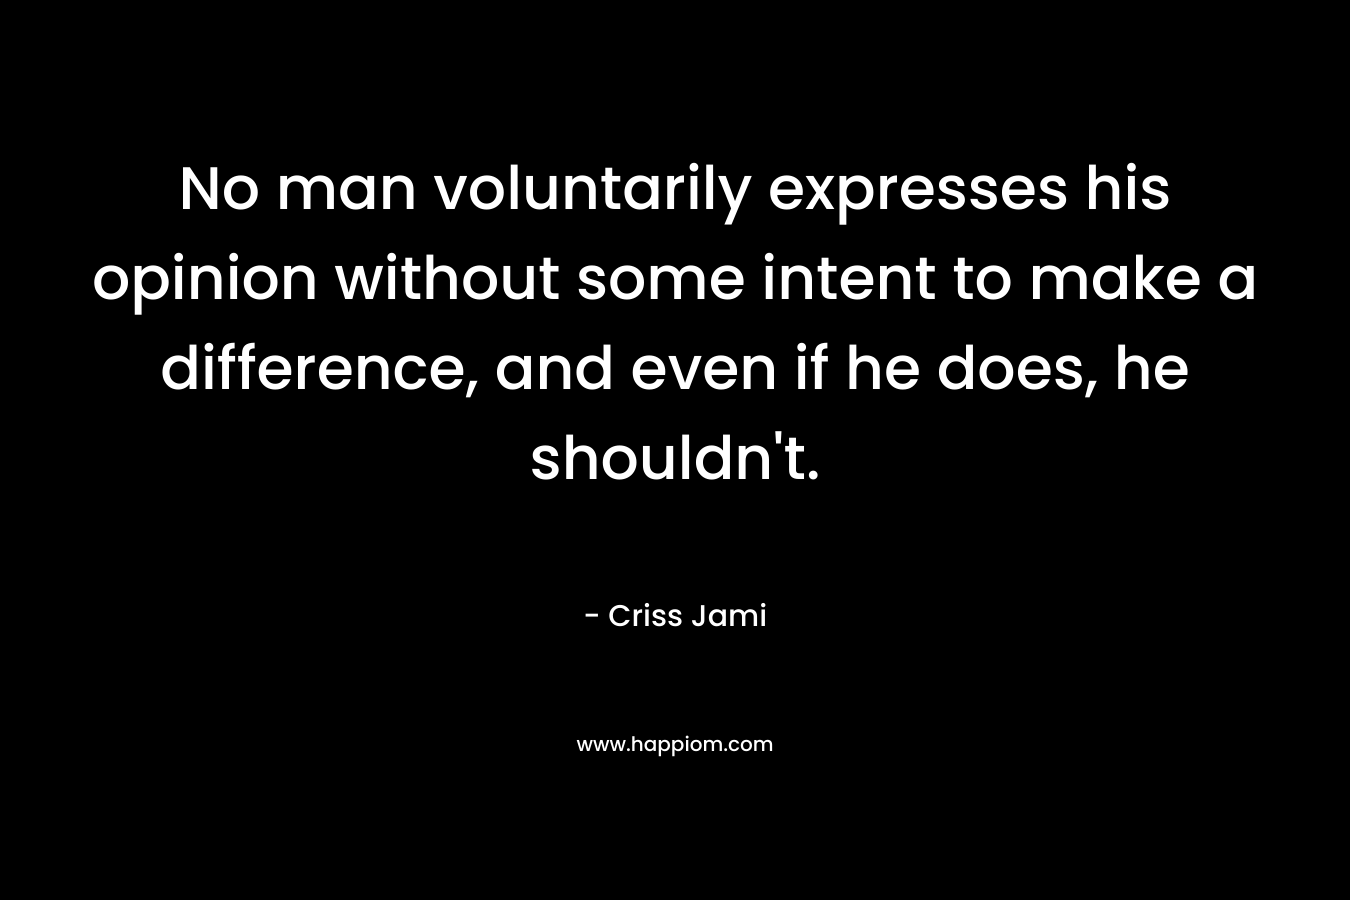 No man voluntarily expresses his opinion without some intent to make a difference, and even if he does, he shouldn’t. – Criss Jami